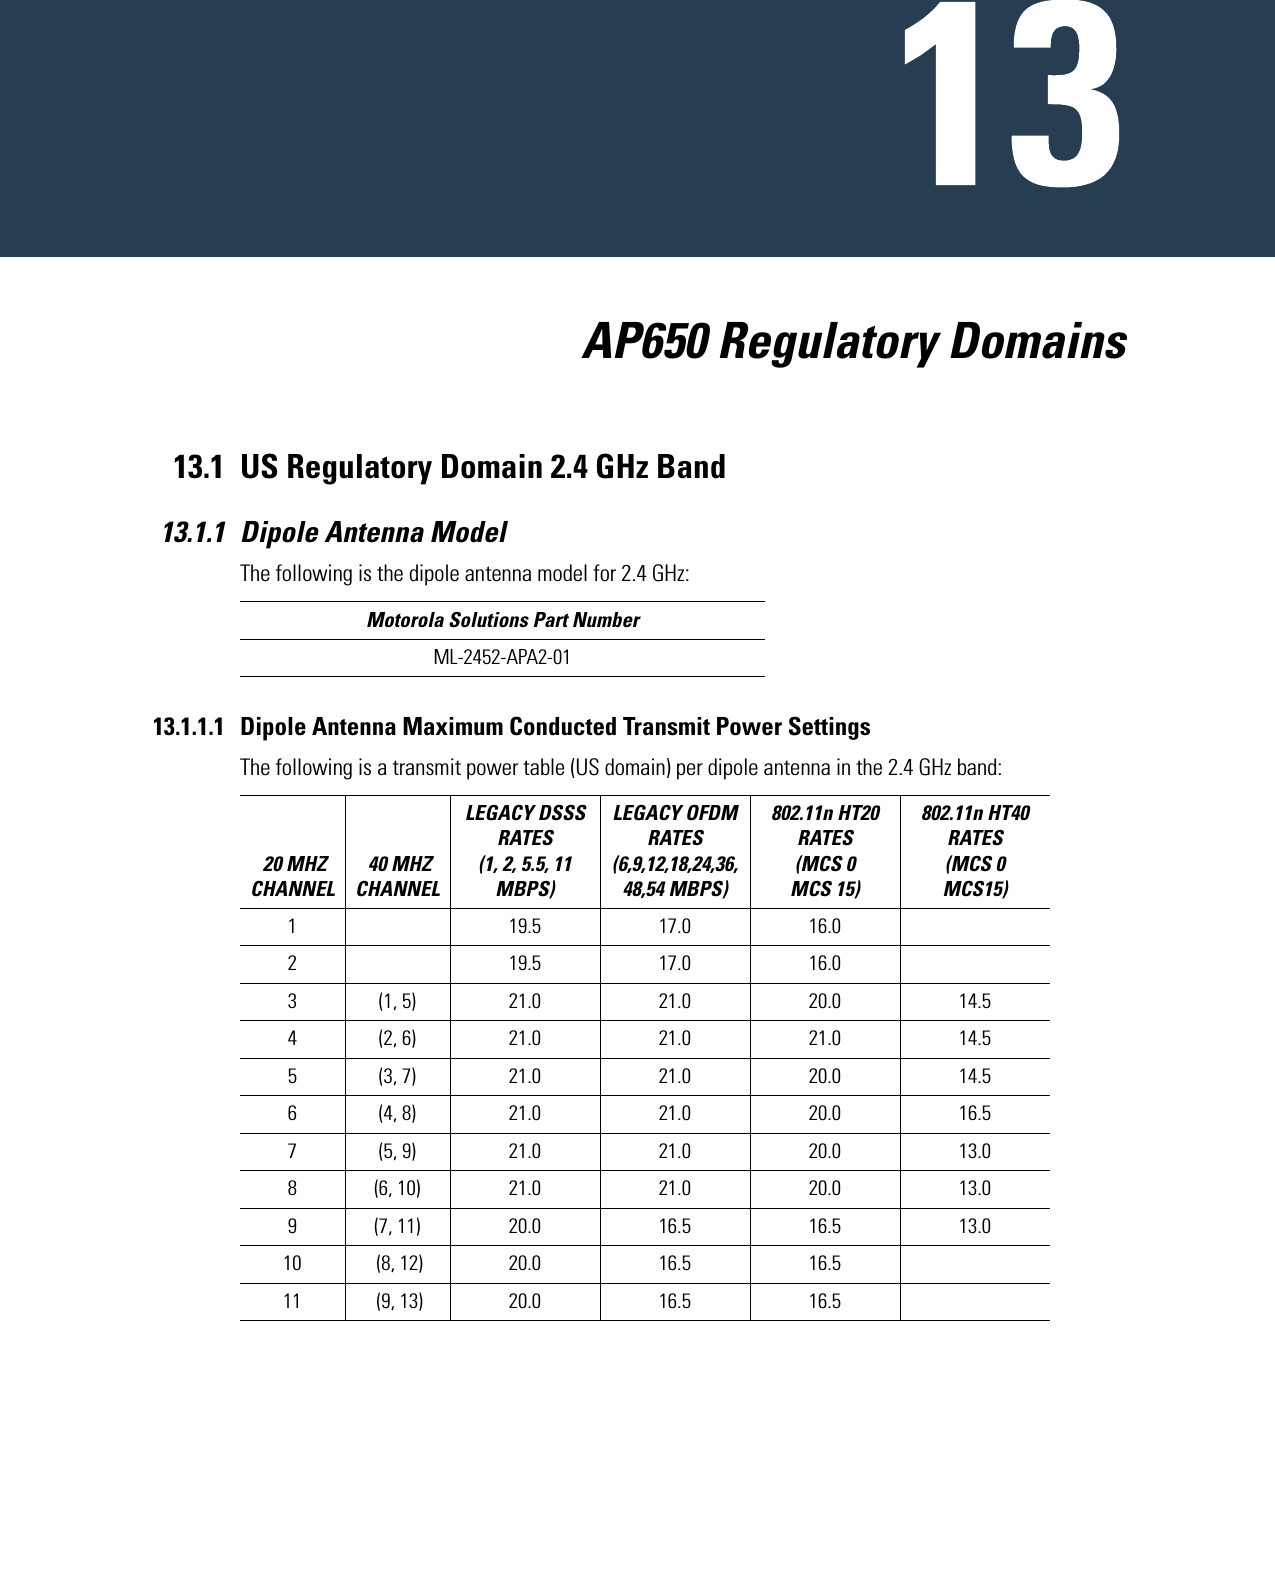                            AP650 Regulatory Domains13.1 US Regulatory Domain 2.4 GHz Band13.1.1 Dipole Antenna ModelThe following is the dipole antenna model for 2.4 GHz:  13.1.1.1 Dipole Antenna Maximum Conducted Transmit Power SettingsThe following is a transmit power table (US domain) per dipole antenna in the 2.4 GHz band:  Motorola Solutions Part NumberML-2452-APA2-01 20 MHZ CHANNEL 40 MHZ CHANNELLEGACY DSSS RATES (1, 2, 5.5, 11 MBPS) LEGACY OFDM RATES (6,9,12,18,24,36,48,54 MBPS) 802.11n HT20 RATES (MCS 0   MCS 15)802.11n HT40 RATES (MCS 0   MCS15) 1  19.5 17.0 16.02     19.5 17.0 16.03 (1, 5) 21.0 21.0 20.0 14.54 (2, 6) 21.0 21.0 21.0 14.55 (3, 7) 21.0 21.0 20.0 14.56 (4, 8) 21.0 21.0 20.0 16.57 (5, 9) 21.0 21.0 20.0 13.08 (6, 10) 21.0 21.0 20.0 13.09 (7, 11) 20.0 16.5 16.5 13.010  (8, 12) 20.0 16.5 16.511  (9, 13) 20.0 16.5 16.5